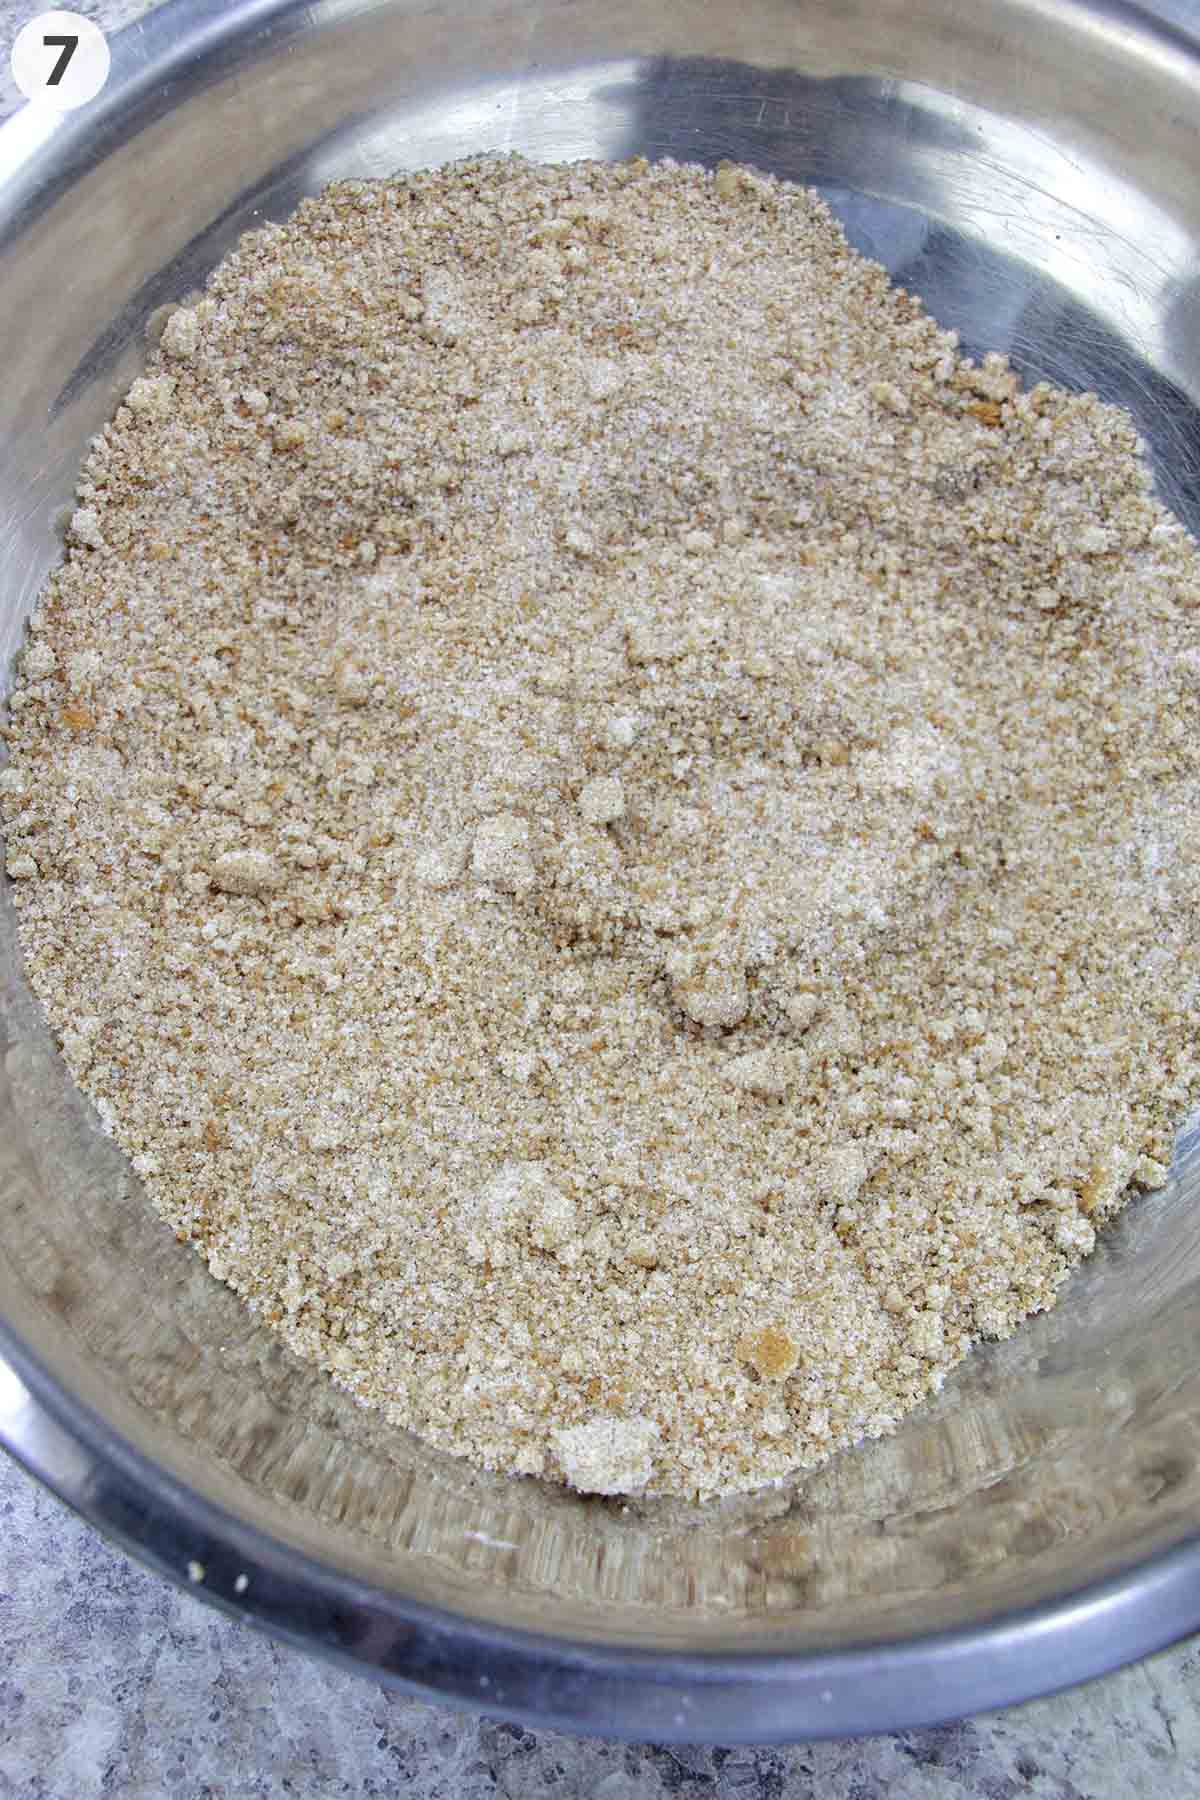 numbered photo showing cinnamon and sugar mixture.